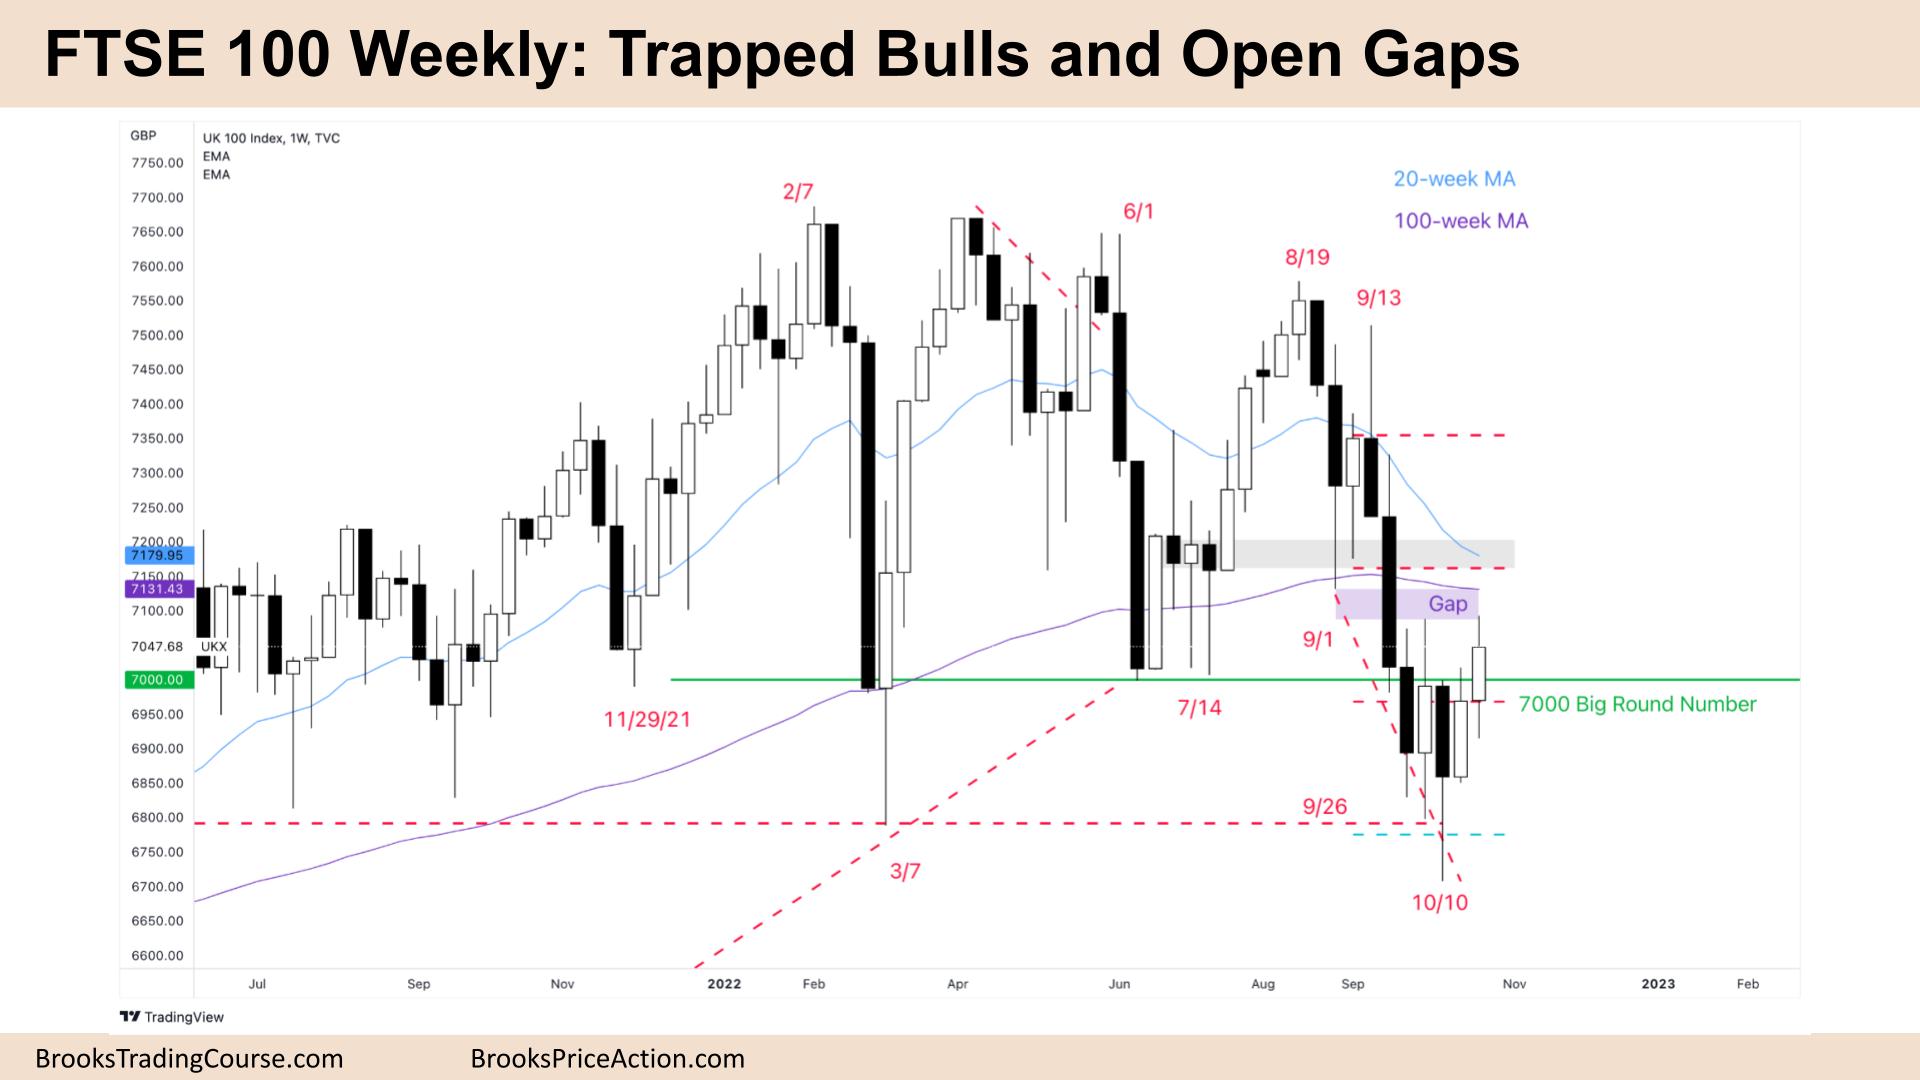 FTSE 100 Trapped Bulls and Open Gaps.jpg